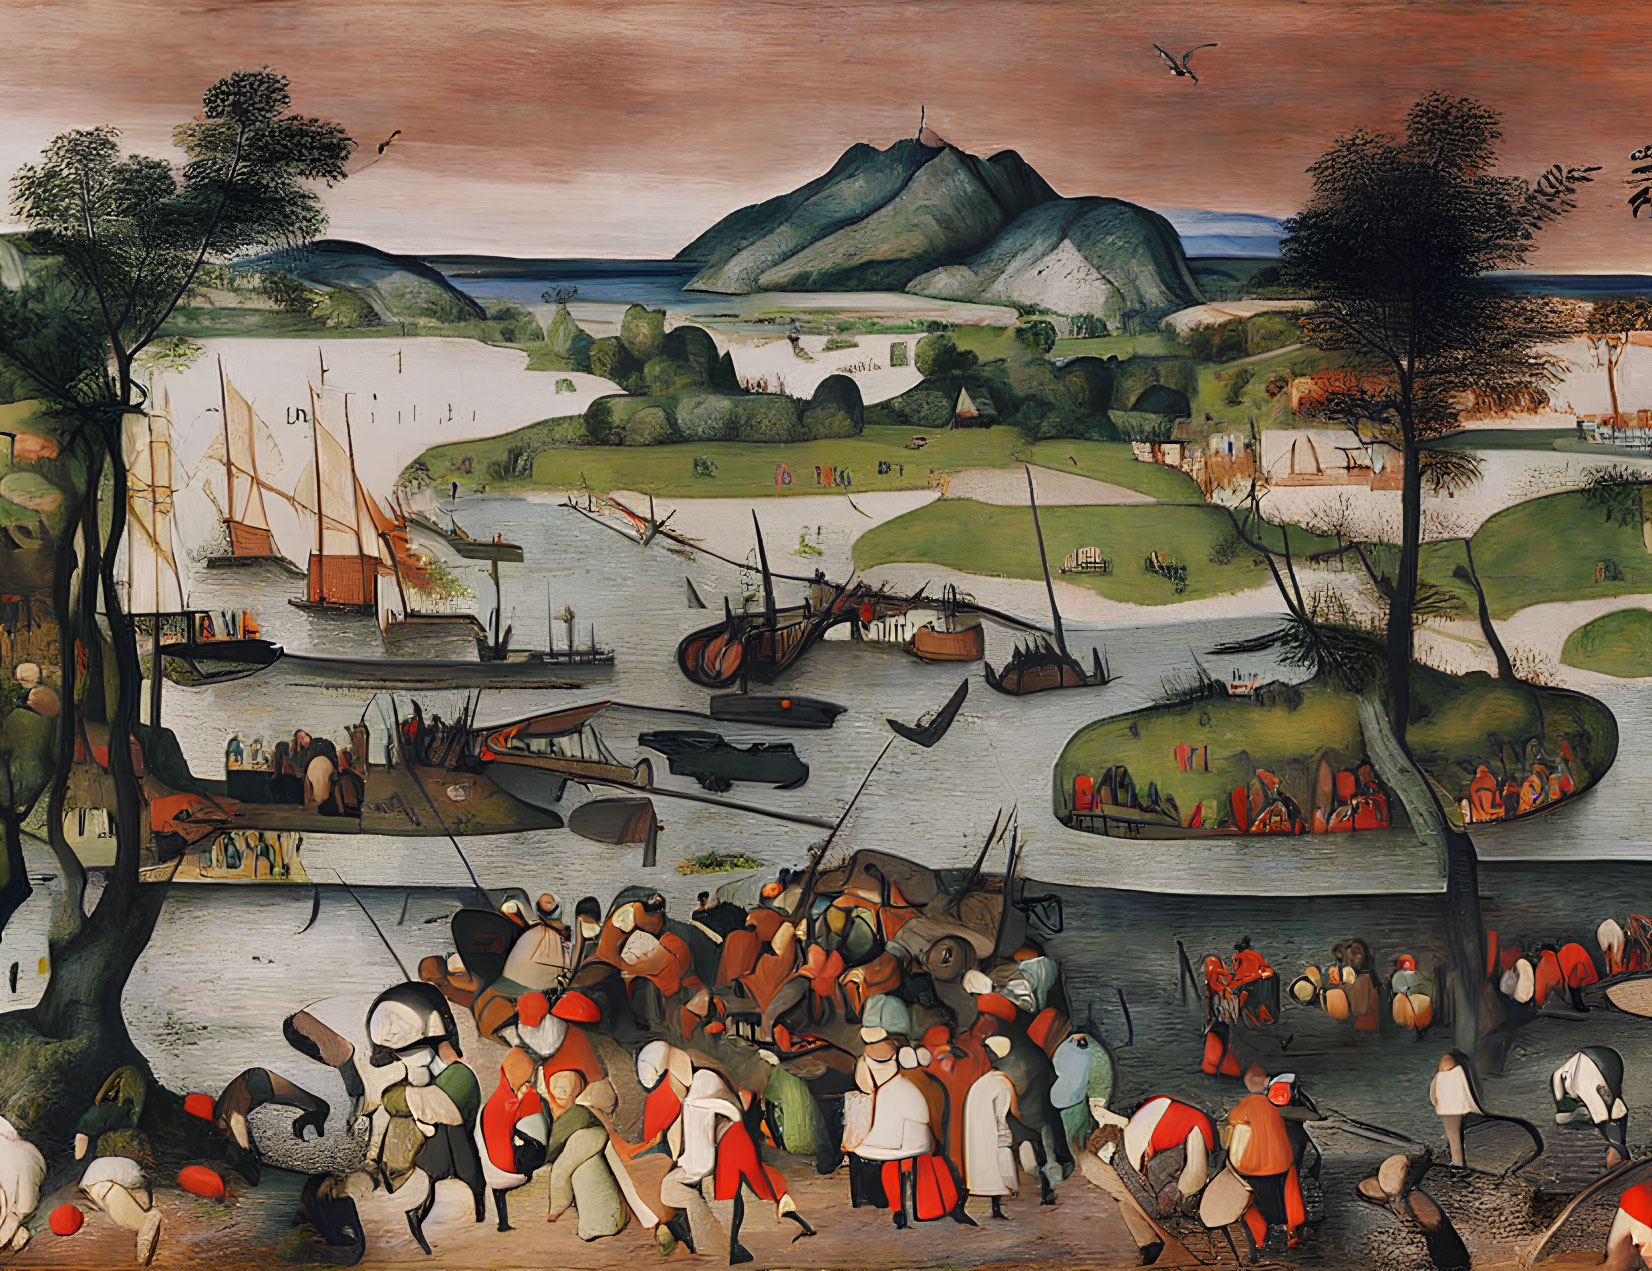 Vibrant Renaissance harbor scene with ships, people, and landscapes